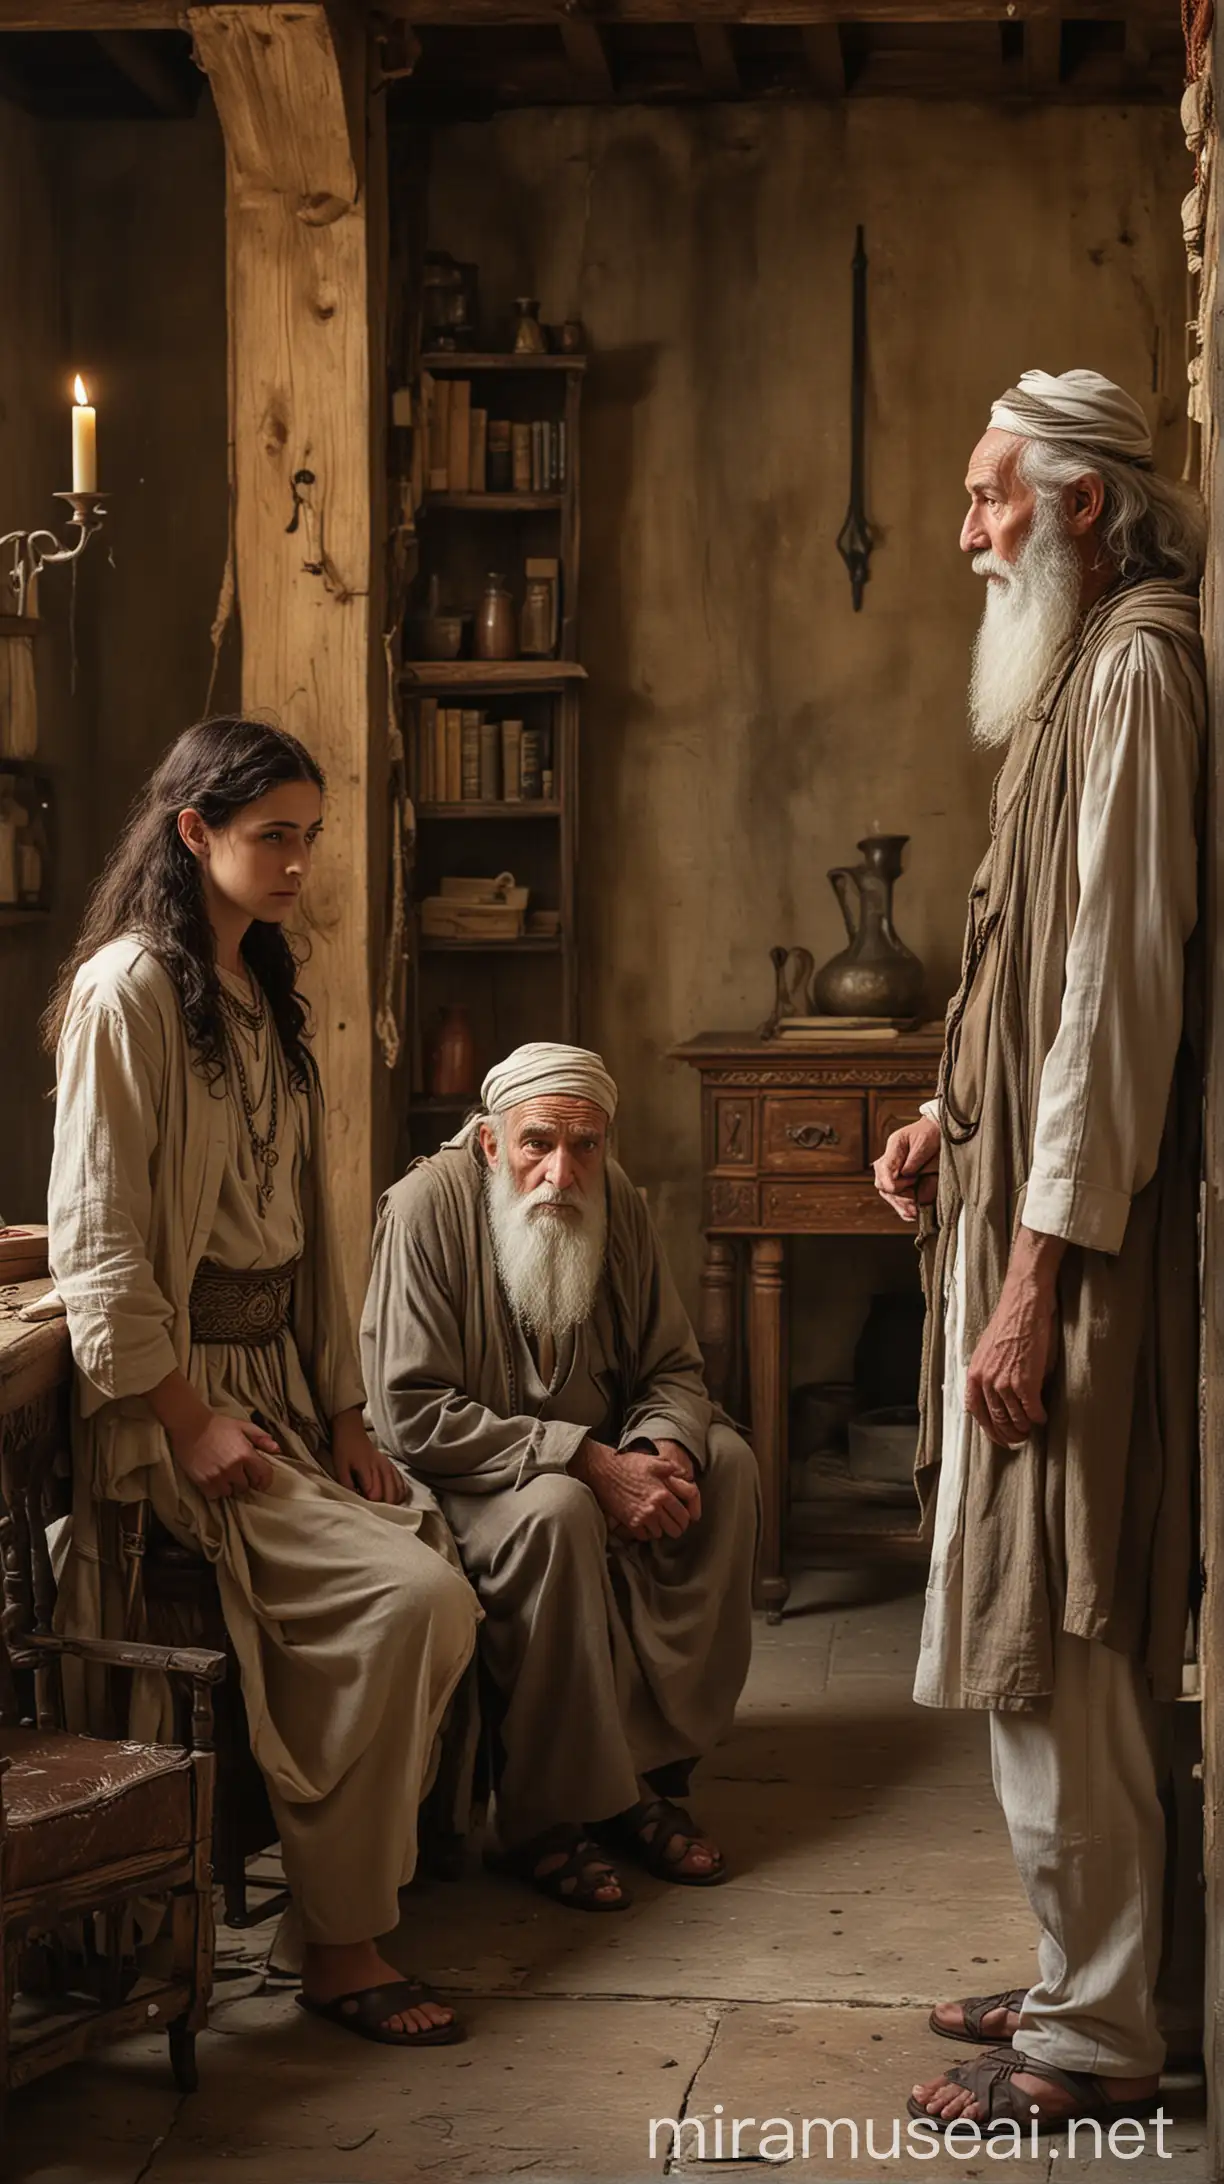 "A serious conversation between an old ancient Jewish man named Judah, a wise-looking older man, and Onan an ancient Jewish young man, looking uncertain, with Tamar an ancient  Jewish lady standing discreetly in the background, set against a rustic backdrop with ancient furniture and decorations."in ancient world 